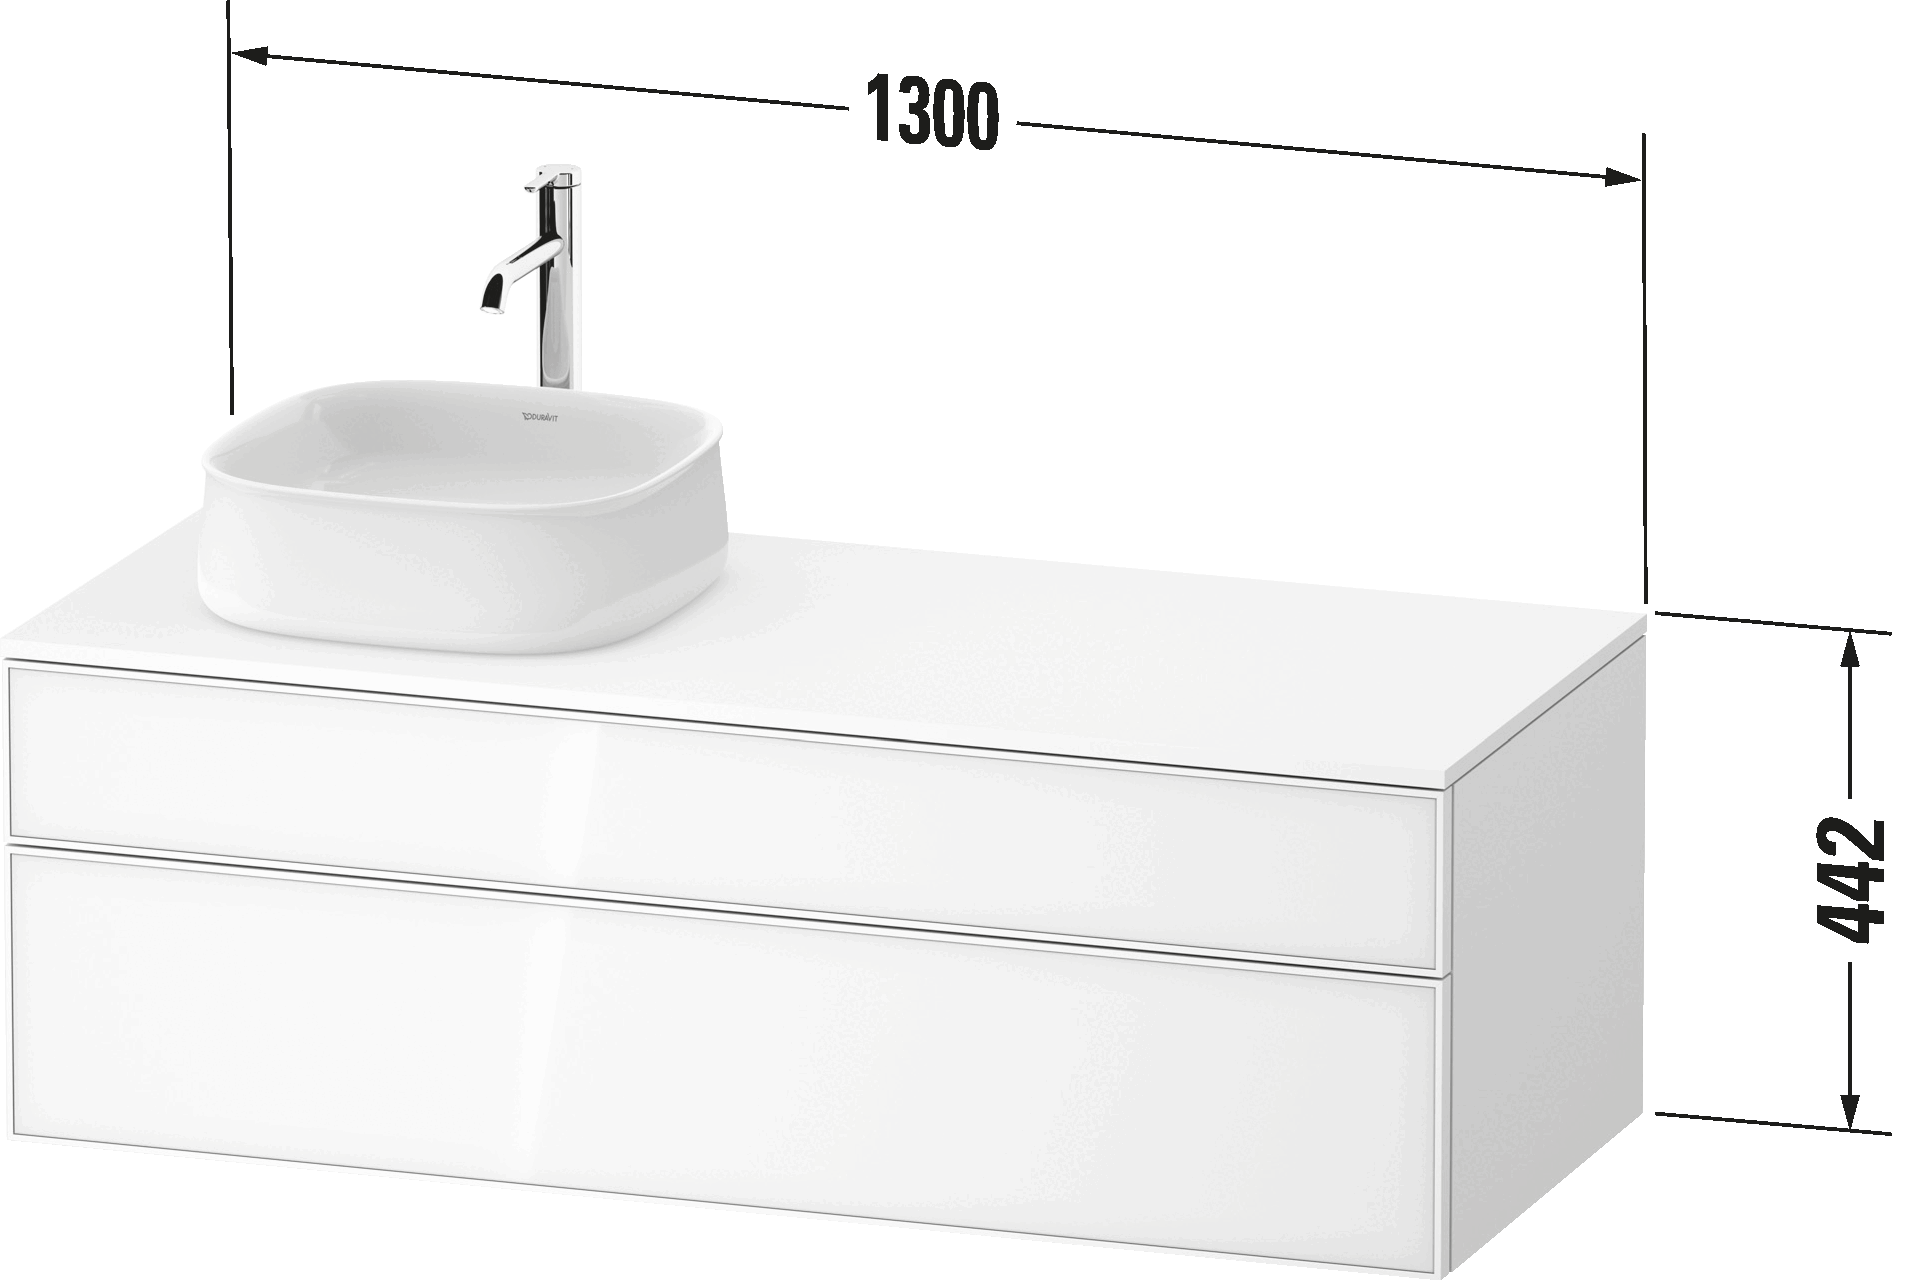 Console vanity unit wall-mounted, ZE4822 L/R